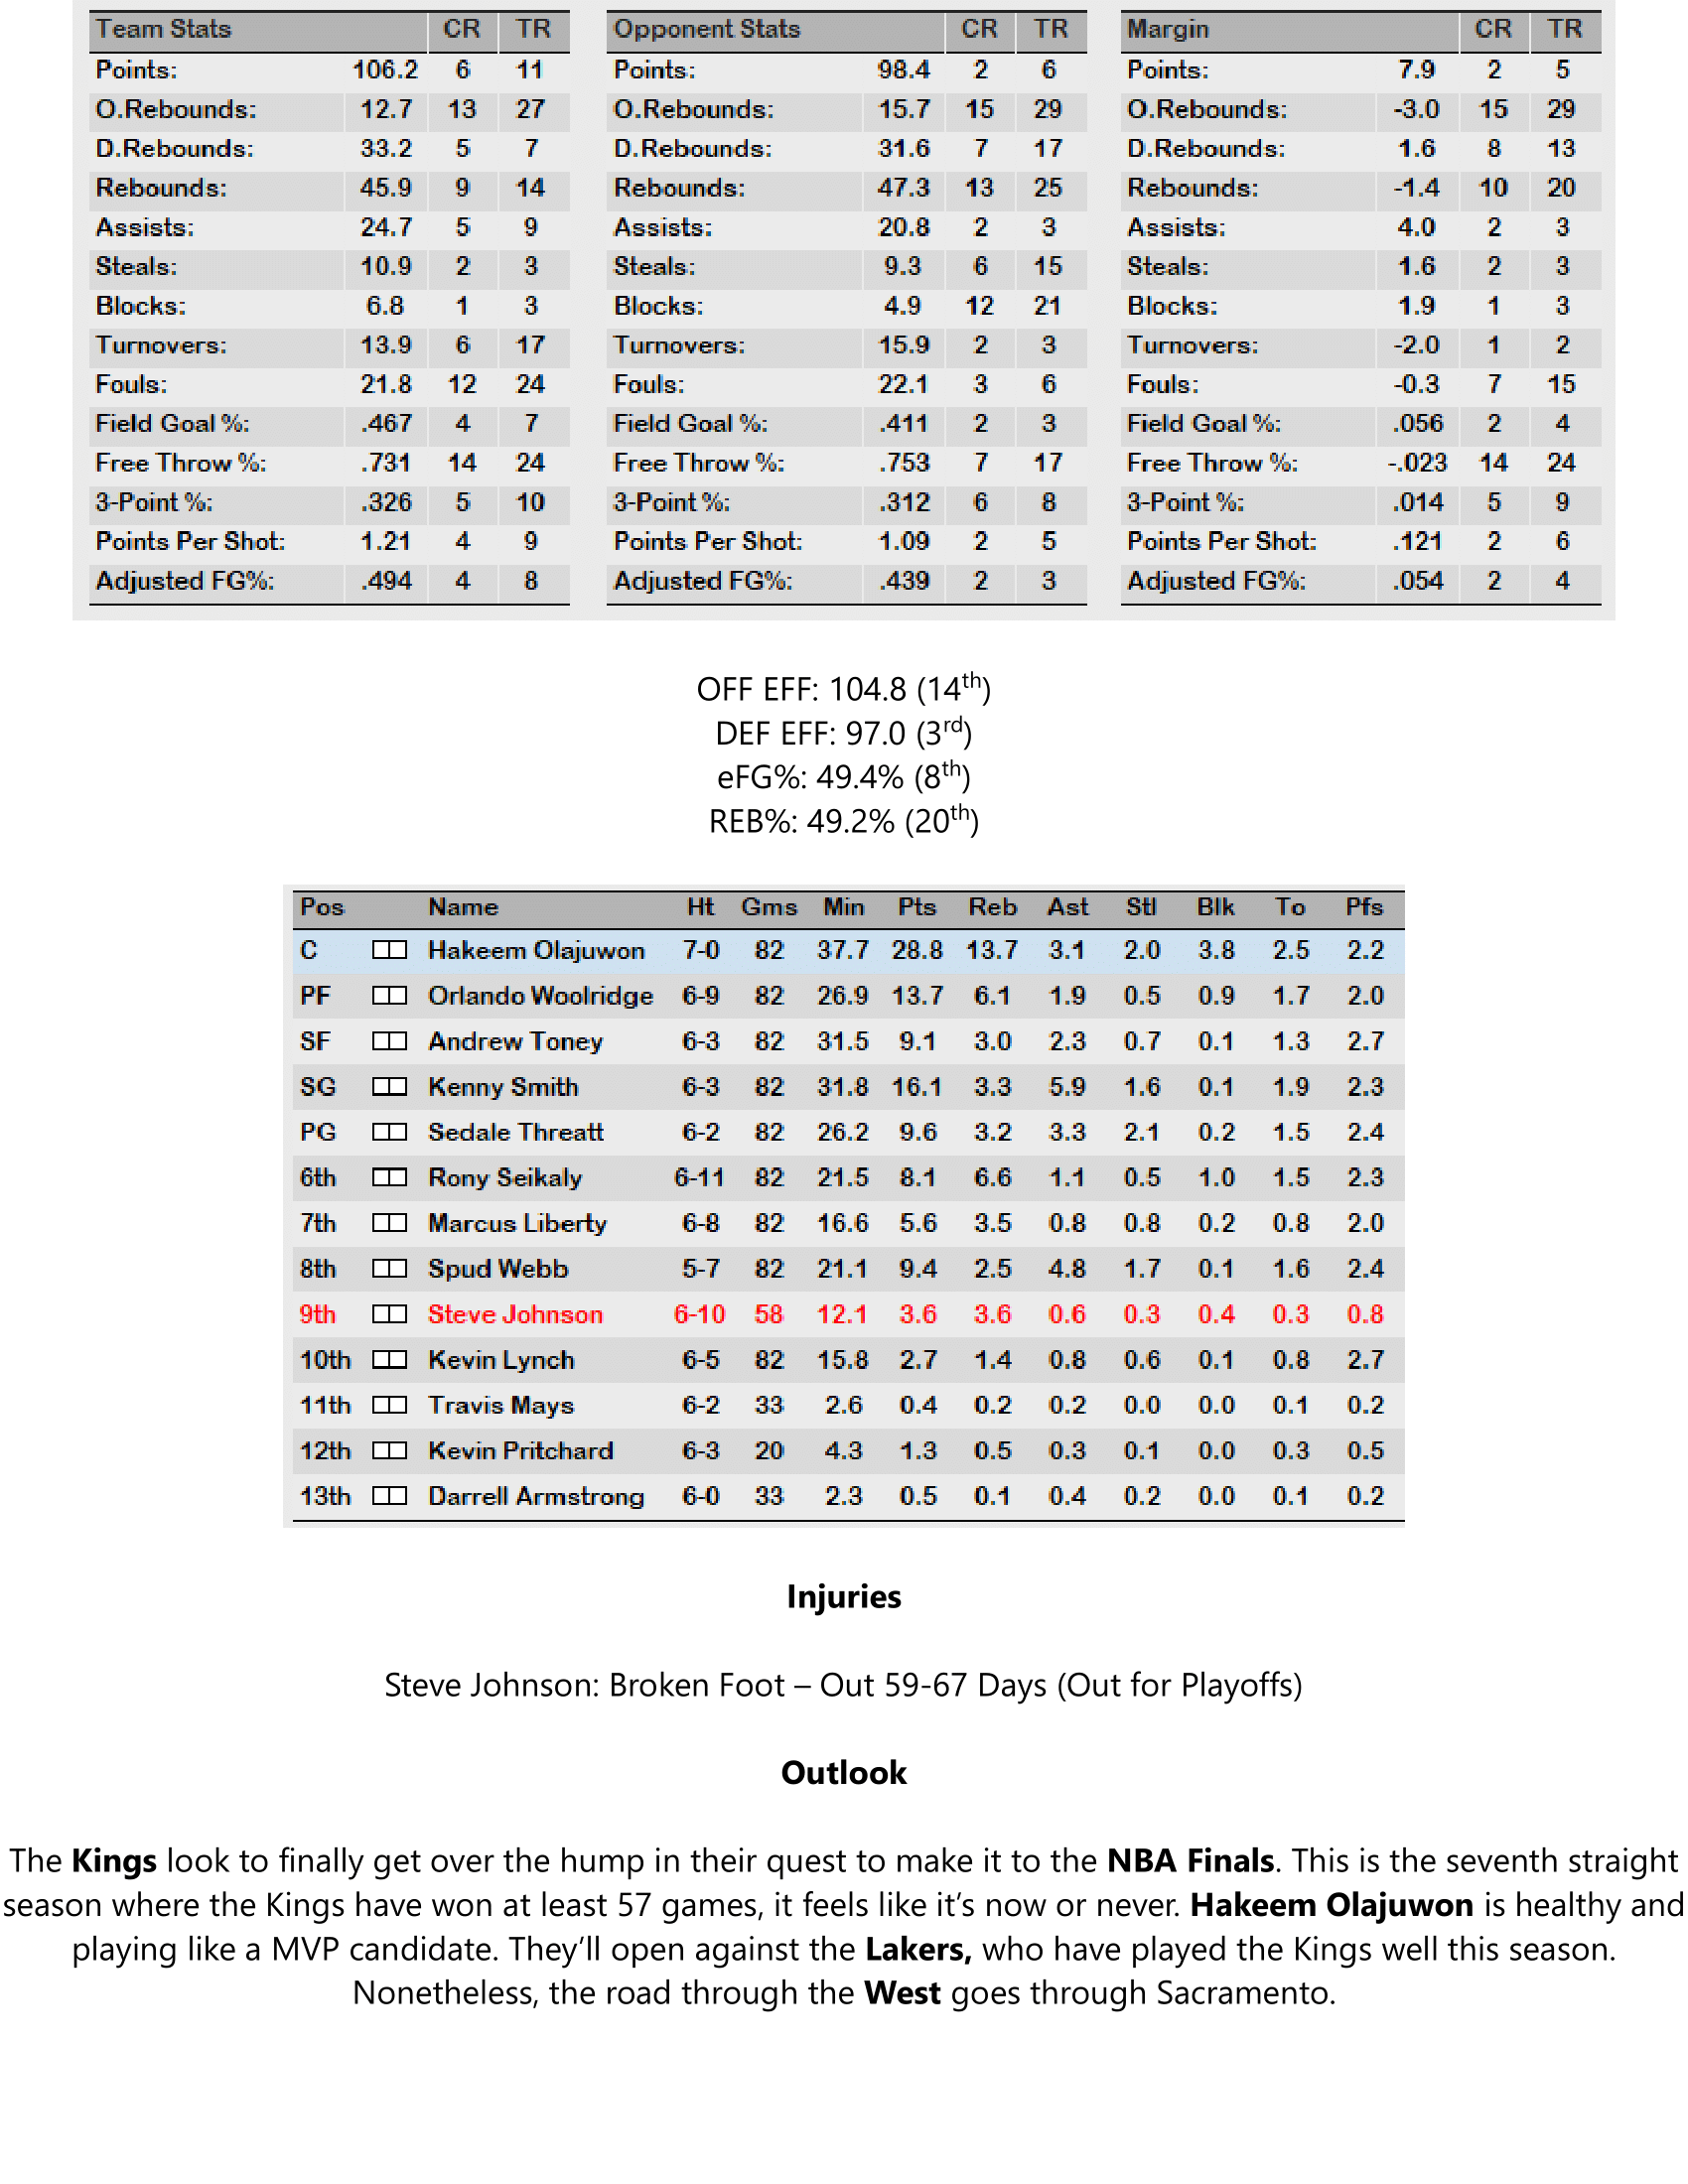 91-92-Part-4-Playoff-Preview-02.png